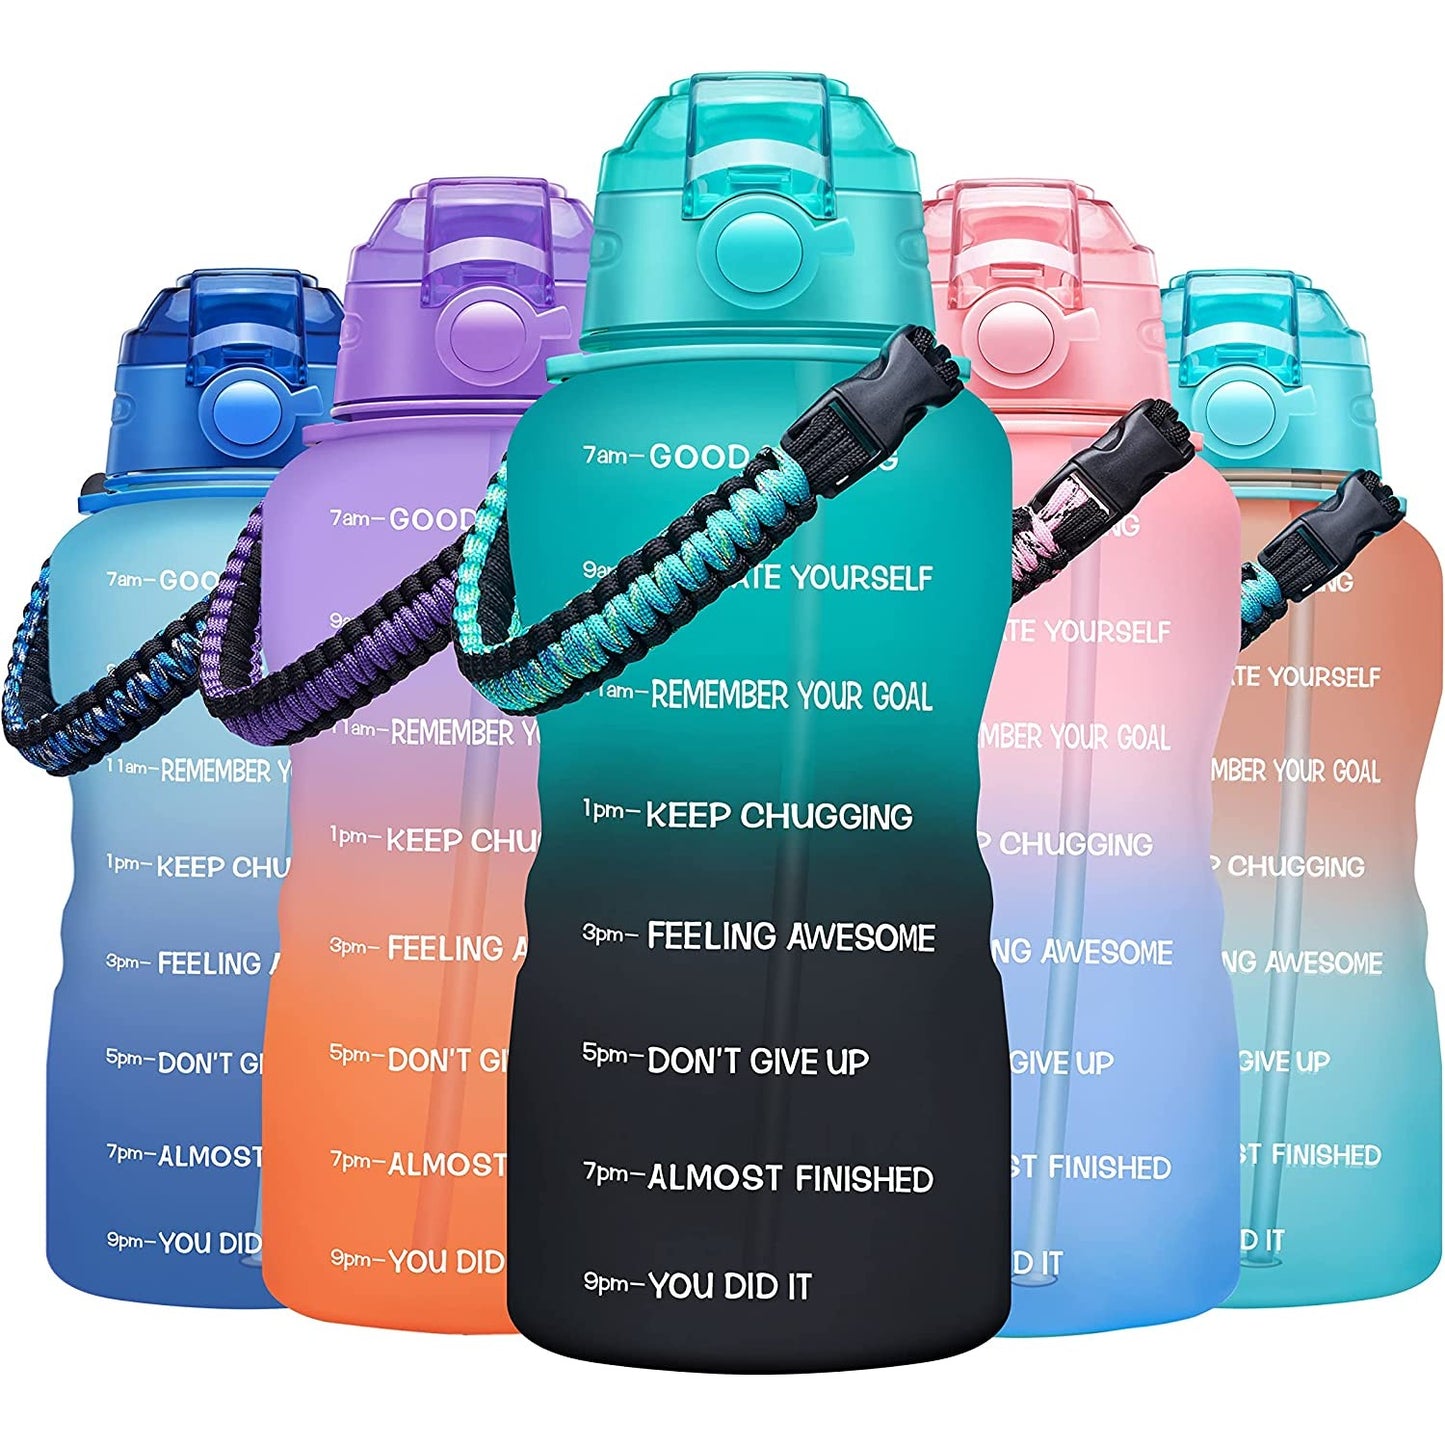 5 different colored motivational water bottles which have motivational quotes printed on the outside. The quotes include, 'Almost finished, keep chugging, remember your goal' and more.